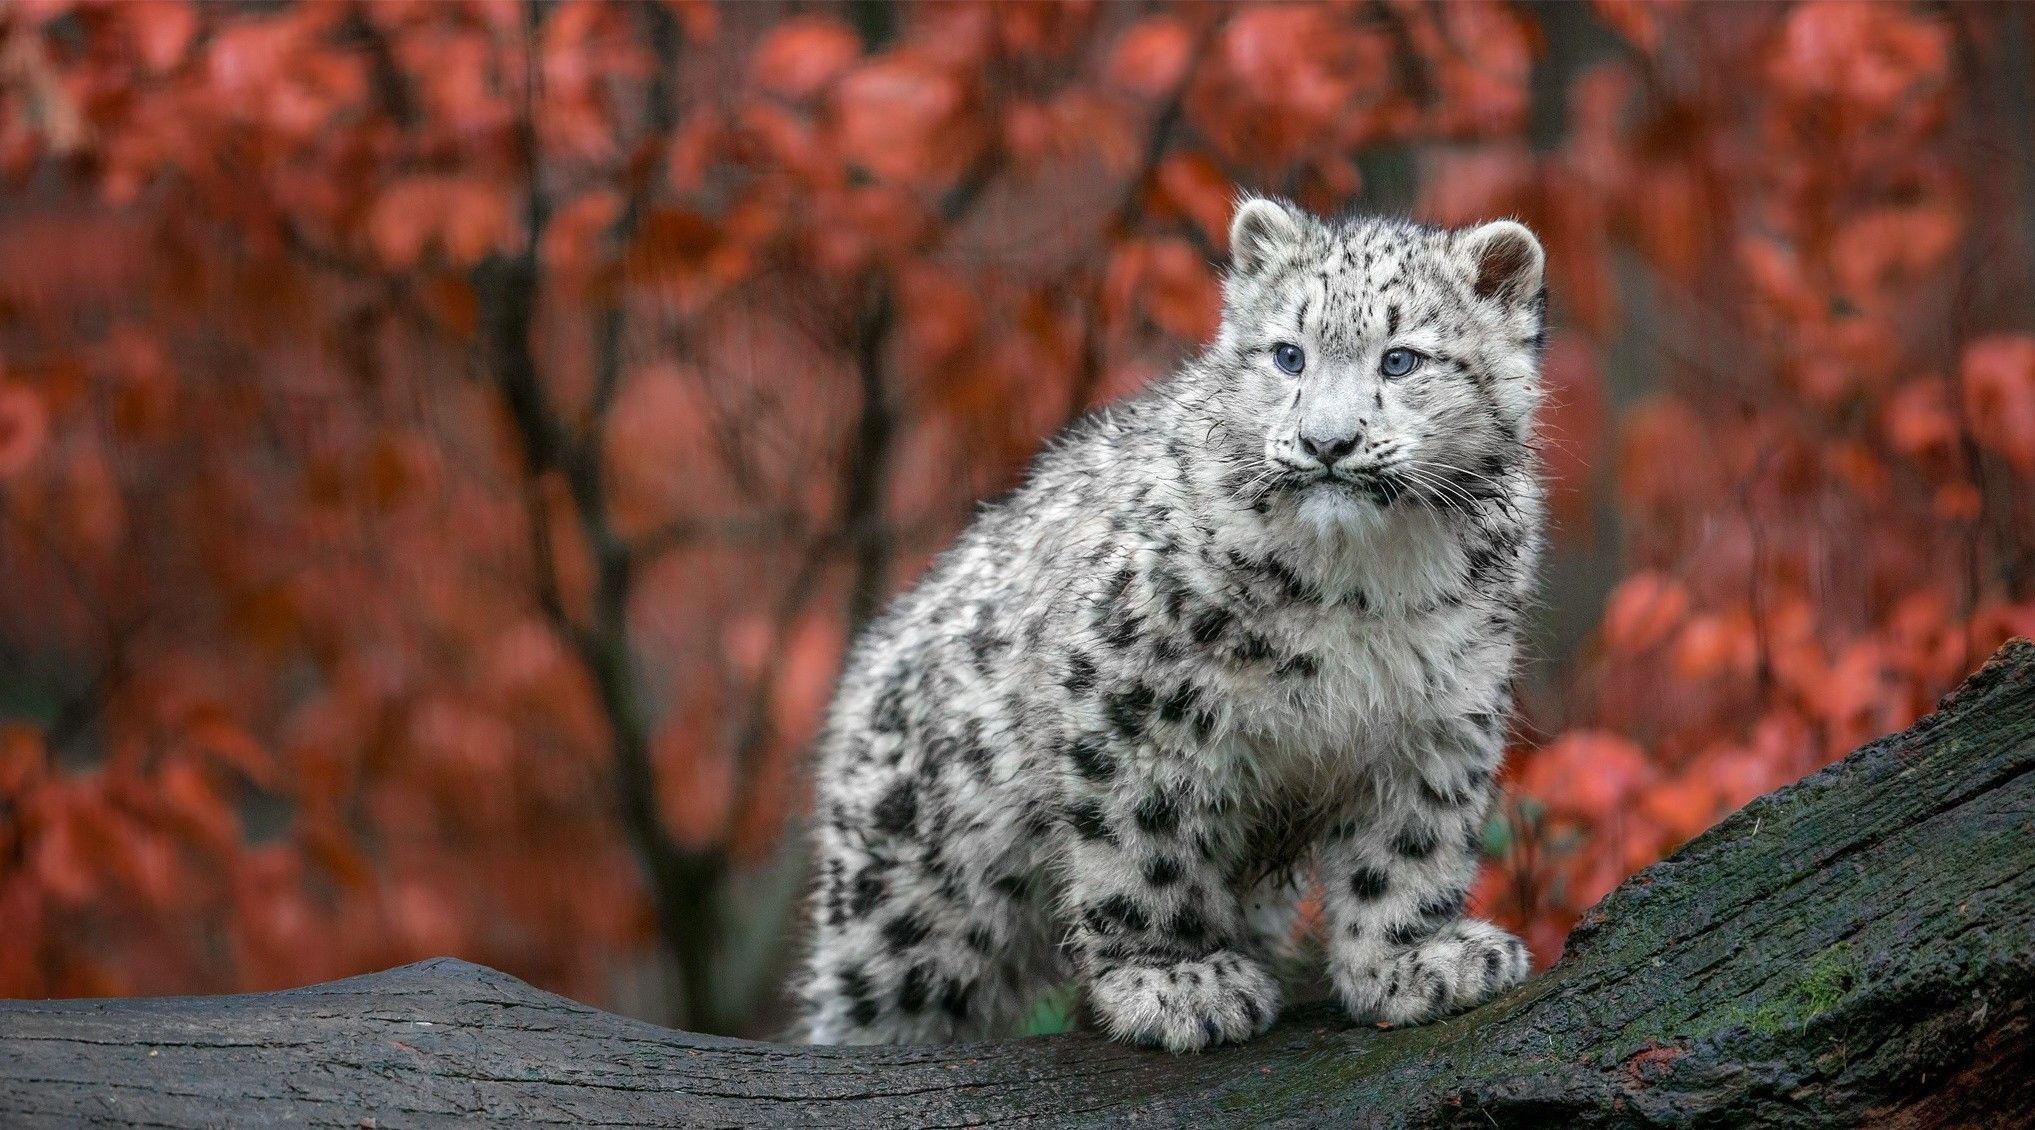 #Germany, #animals, #snow leopards, #baby animals, #fall